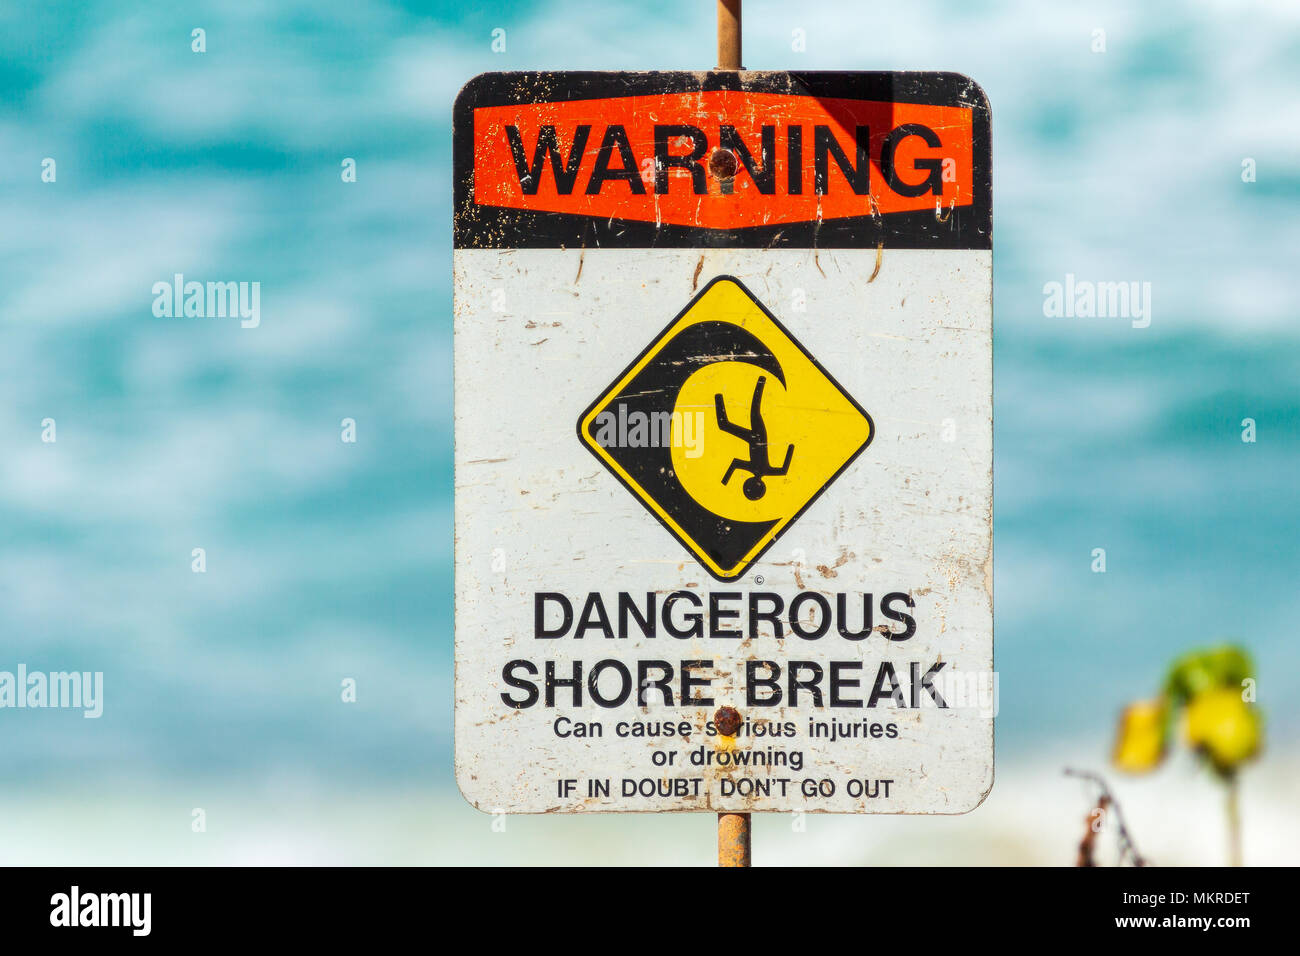 WARNING DANGEROUS SHORE BREAK sign Can cause serious injuries or drowning  IF IN DOUBT, DON'T GO OUT Stock Photo